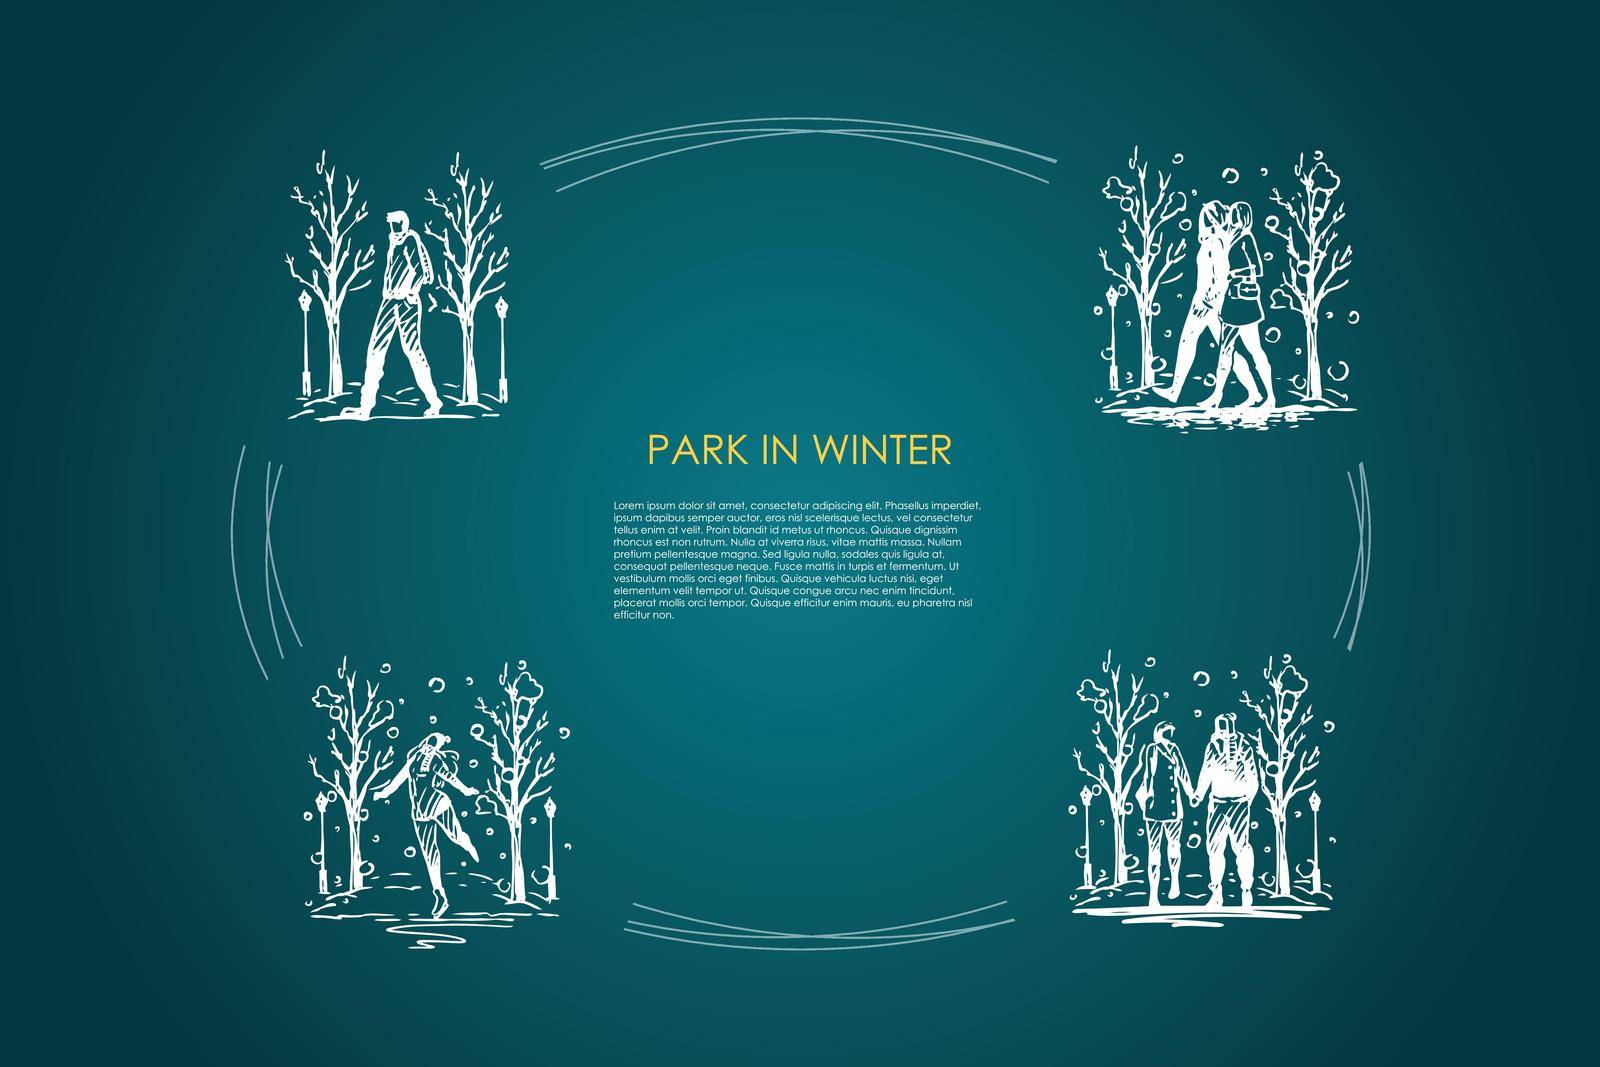 Park in winter - people walking in park in winter vector concept set. Hand drawn sketch isolated illustration